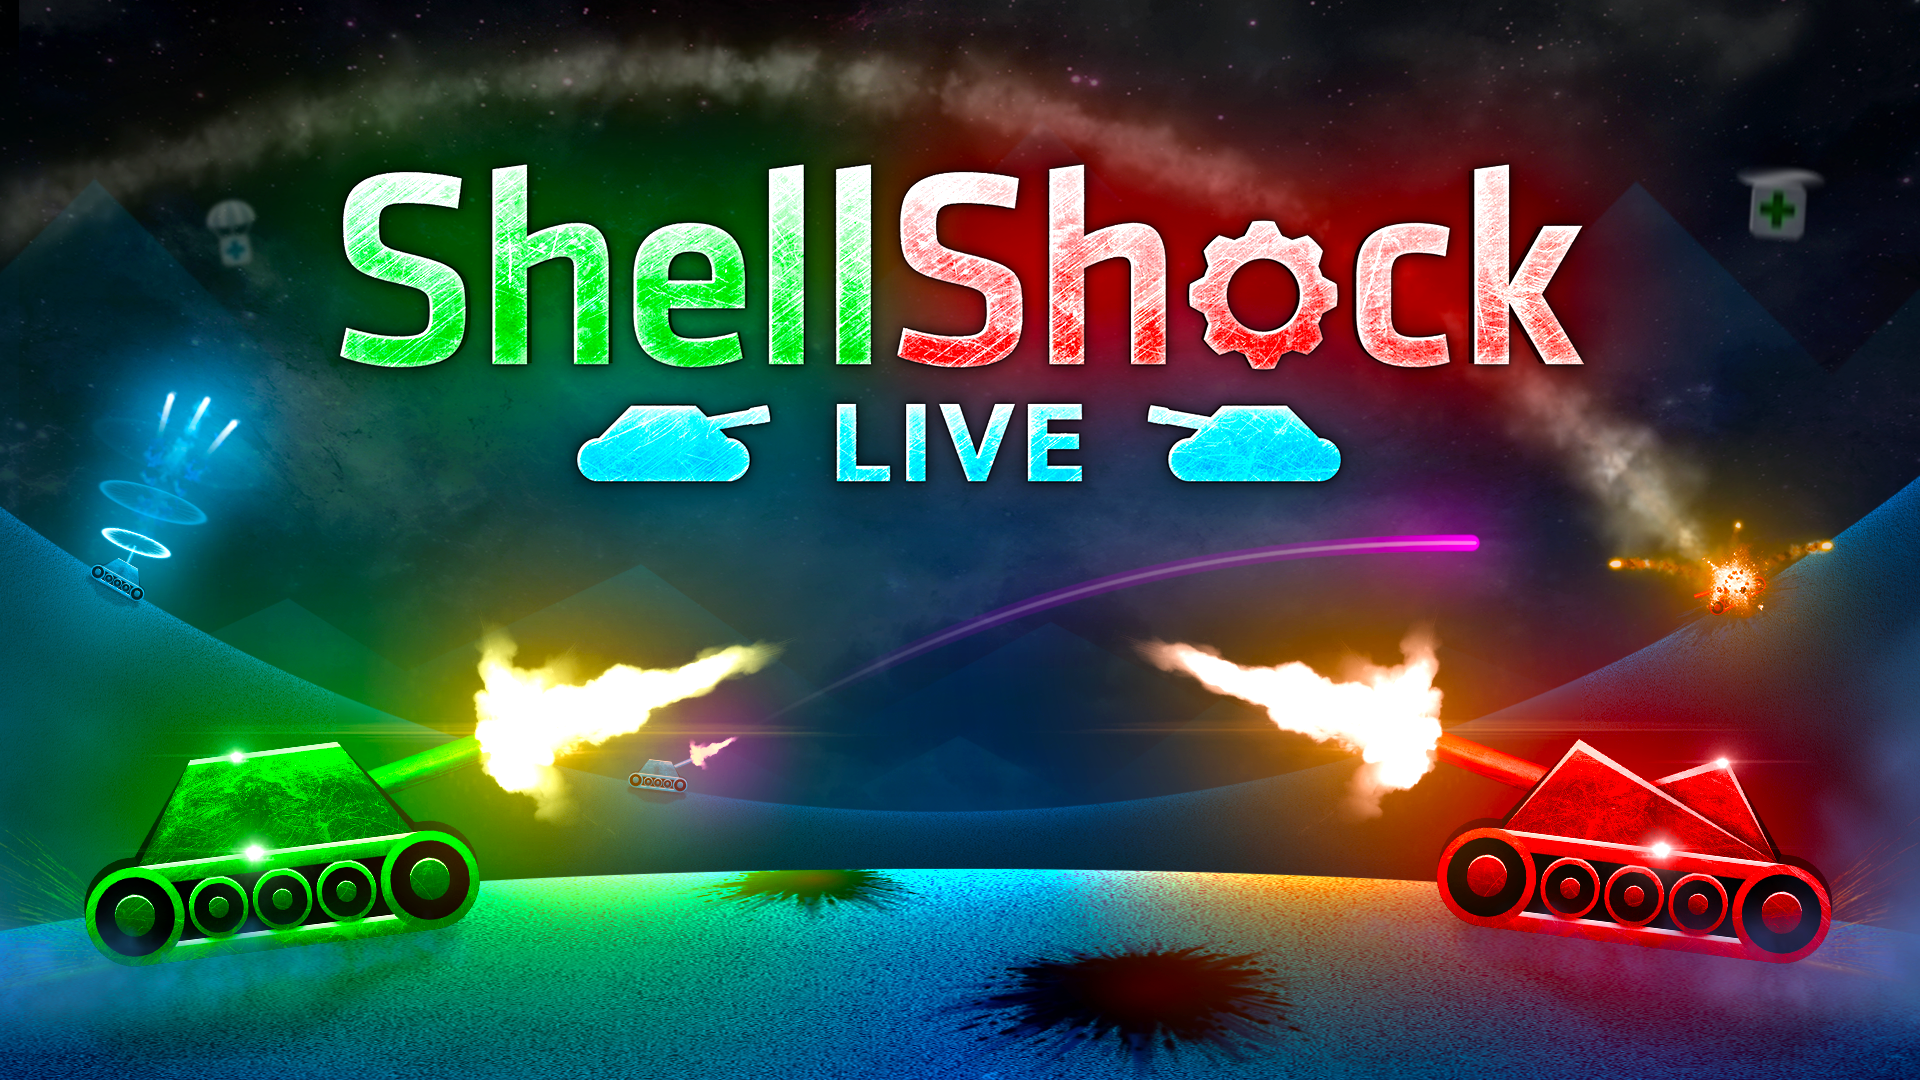 Strategic multiplayer artillery game ShellShock Live is out now